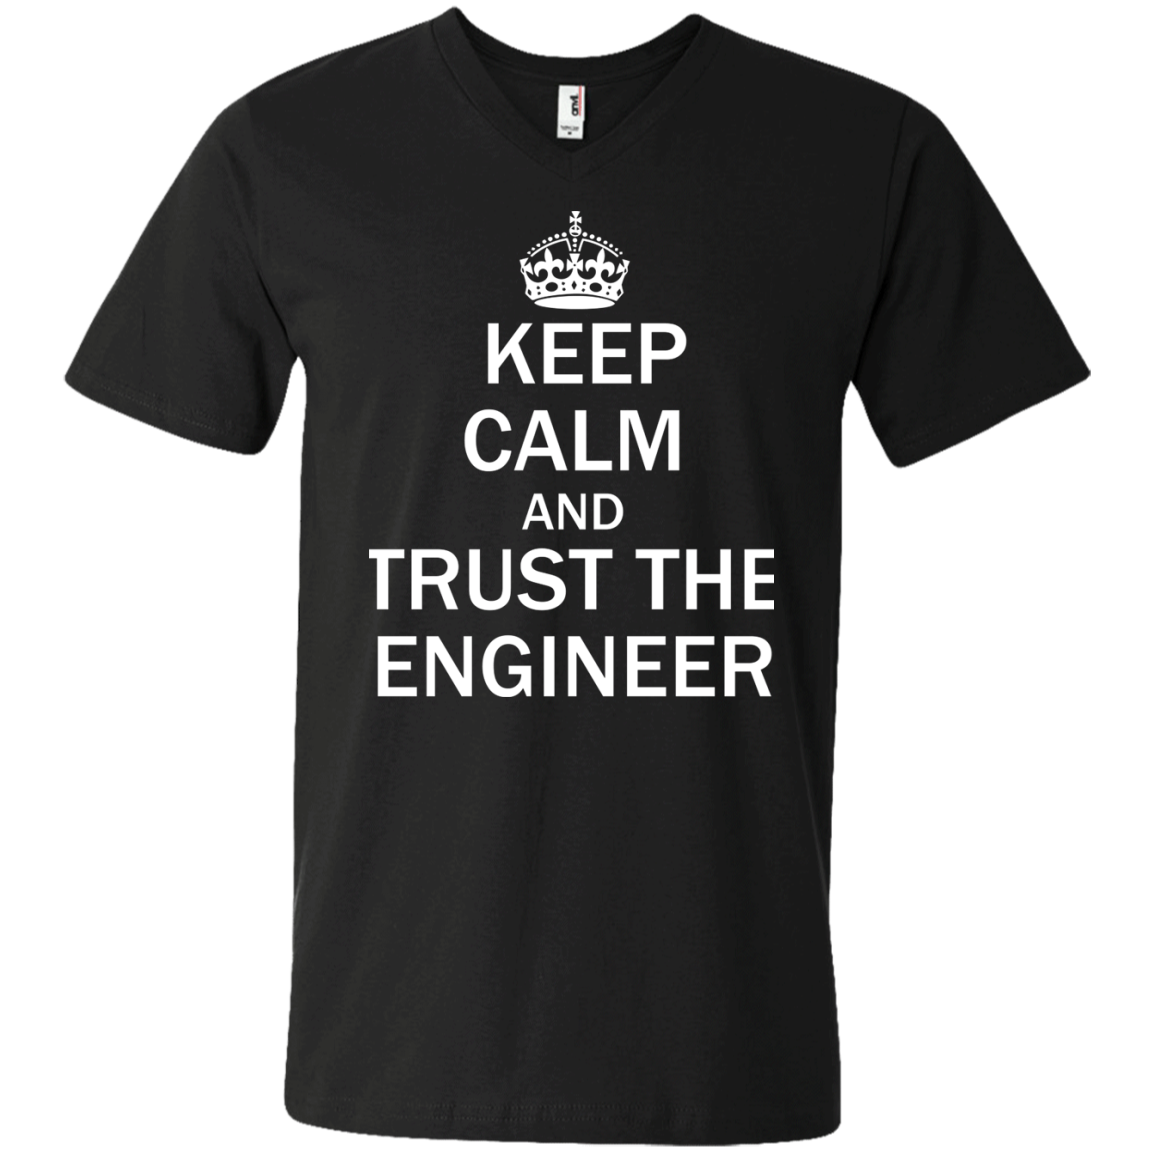 Keep Calm and Trust the Engineer